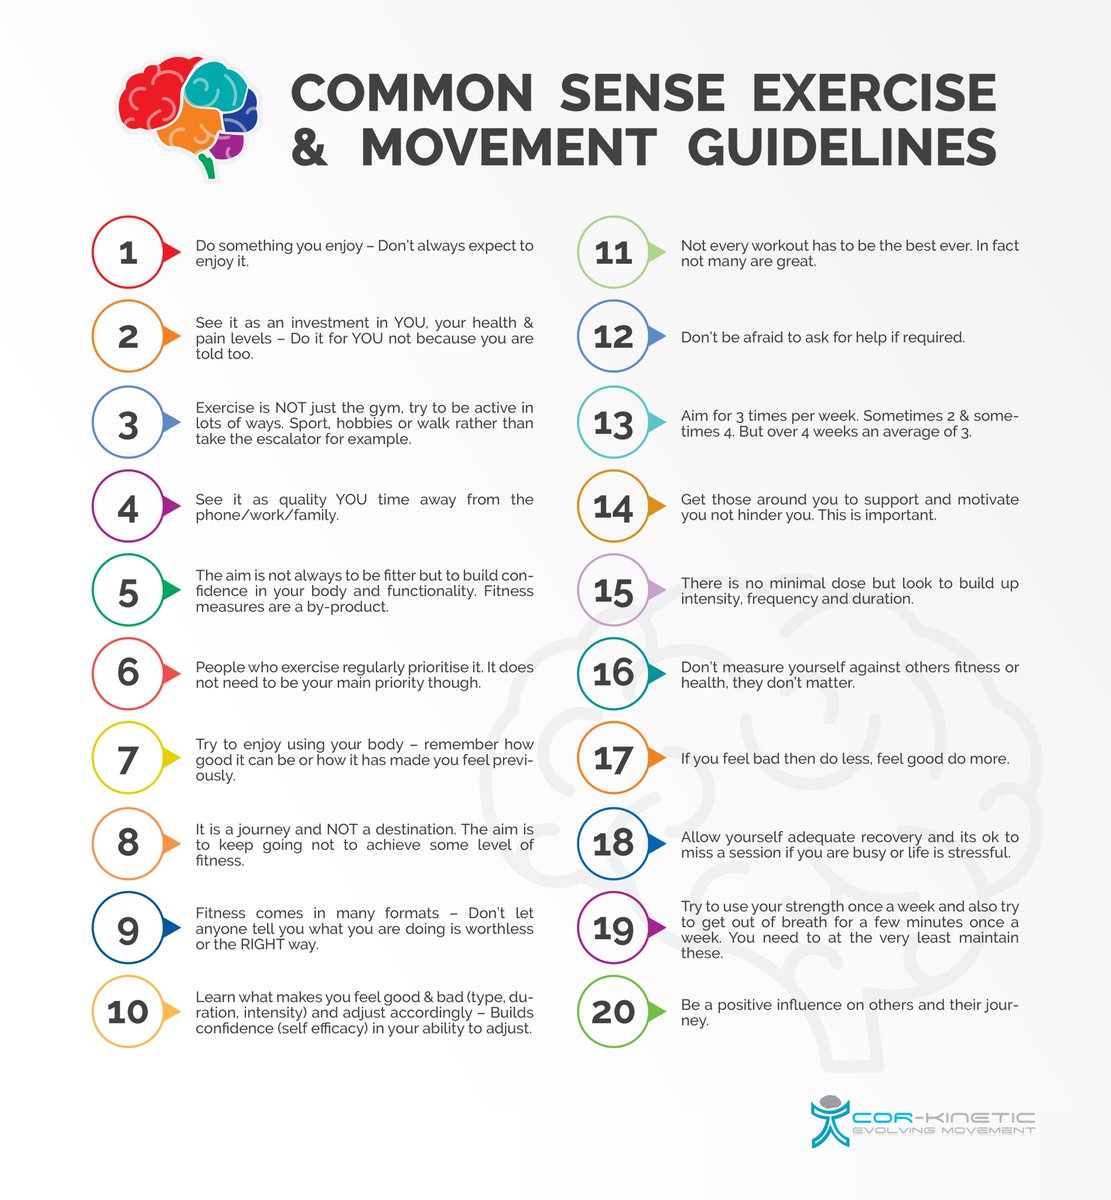 Common sense guidelines for movement & exercise! Fully downloadable and in multiple languages cor-kinetic.com/common-sense-e…